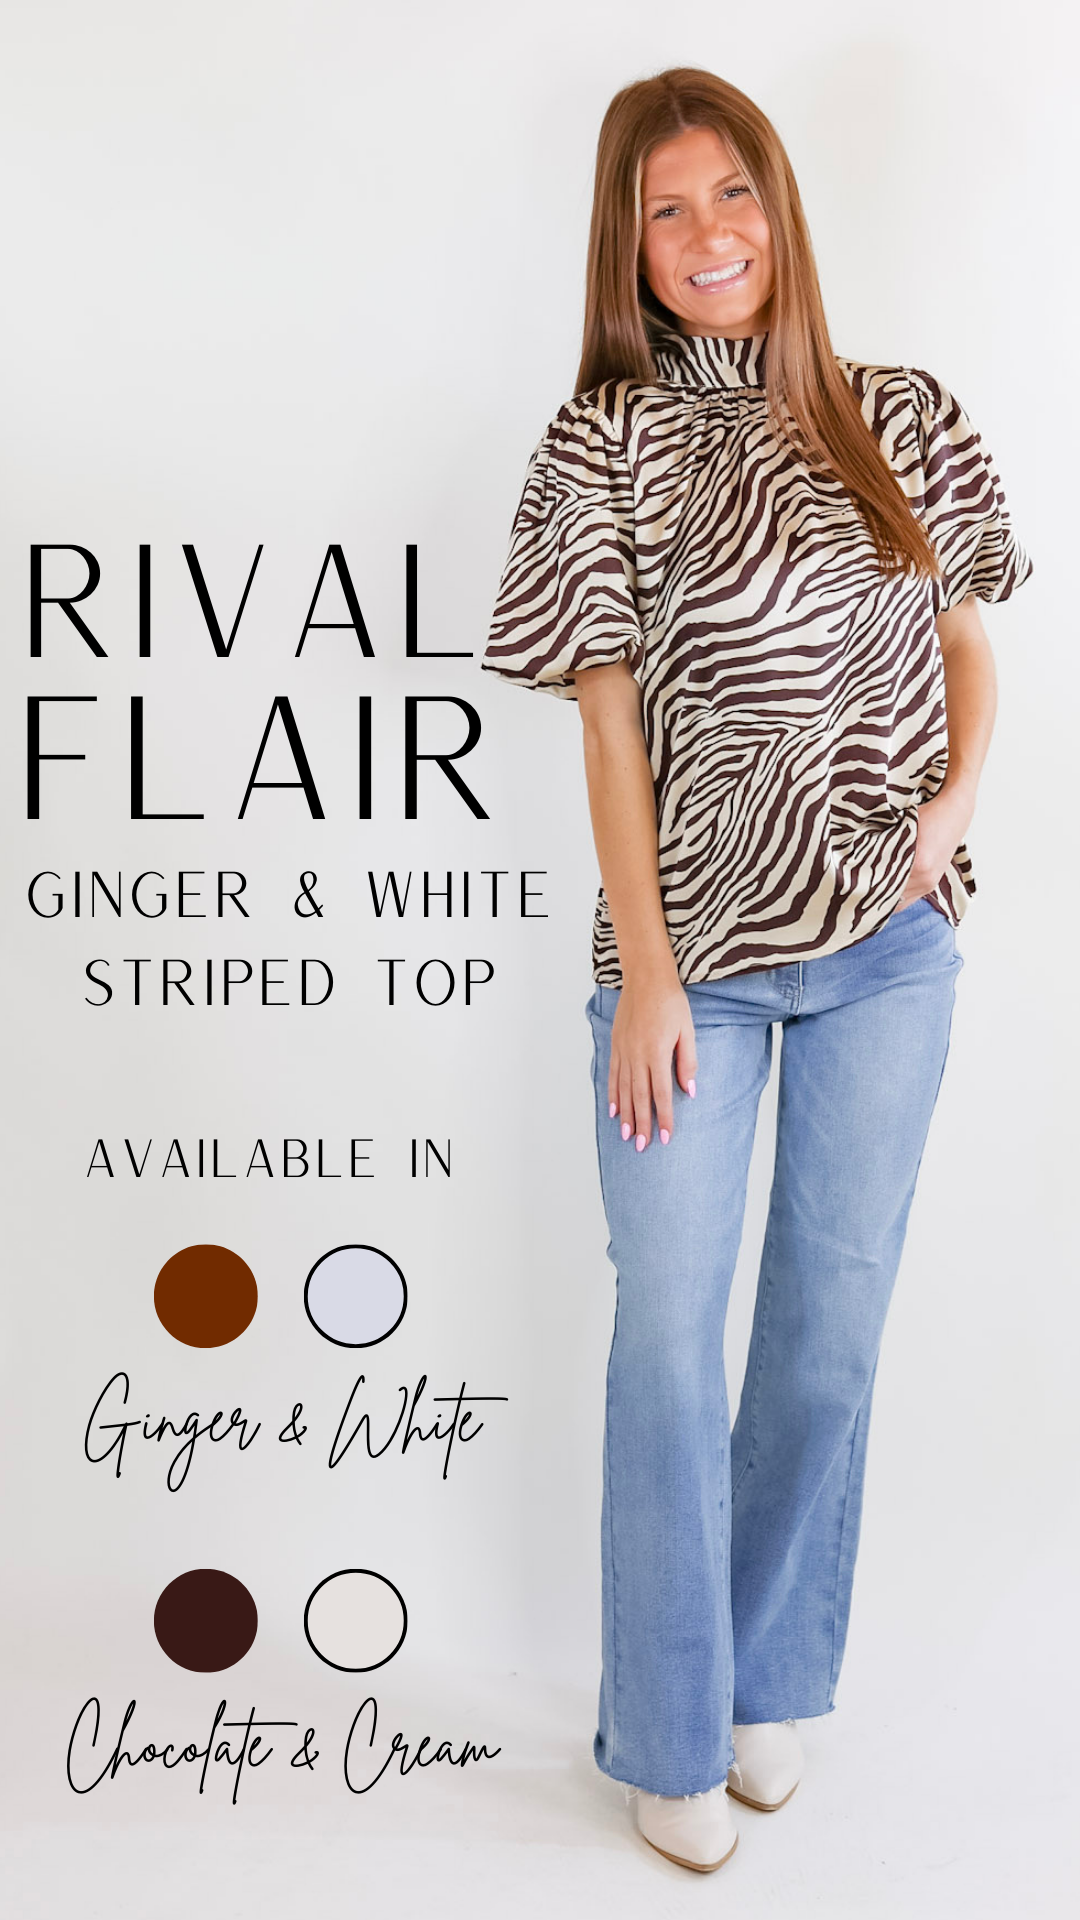 Rival Flair Zebra Print Top with Mock Neck in Chocolate Brown and Cream